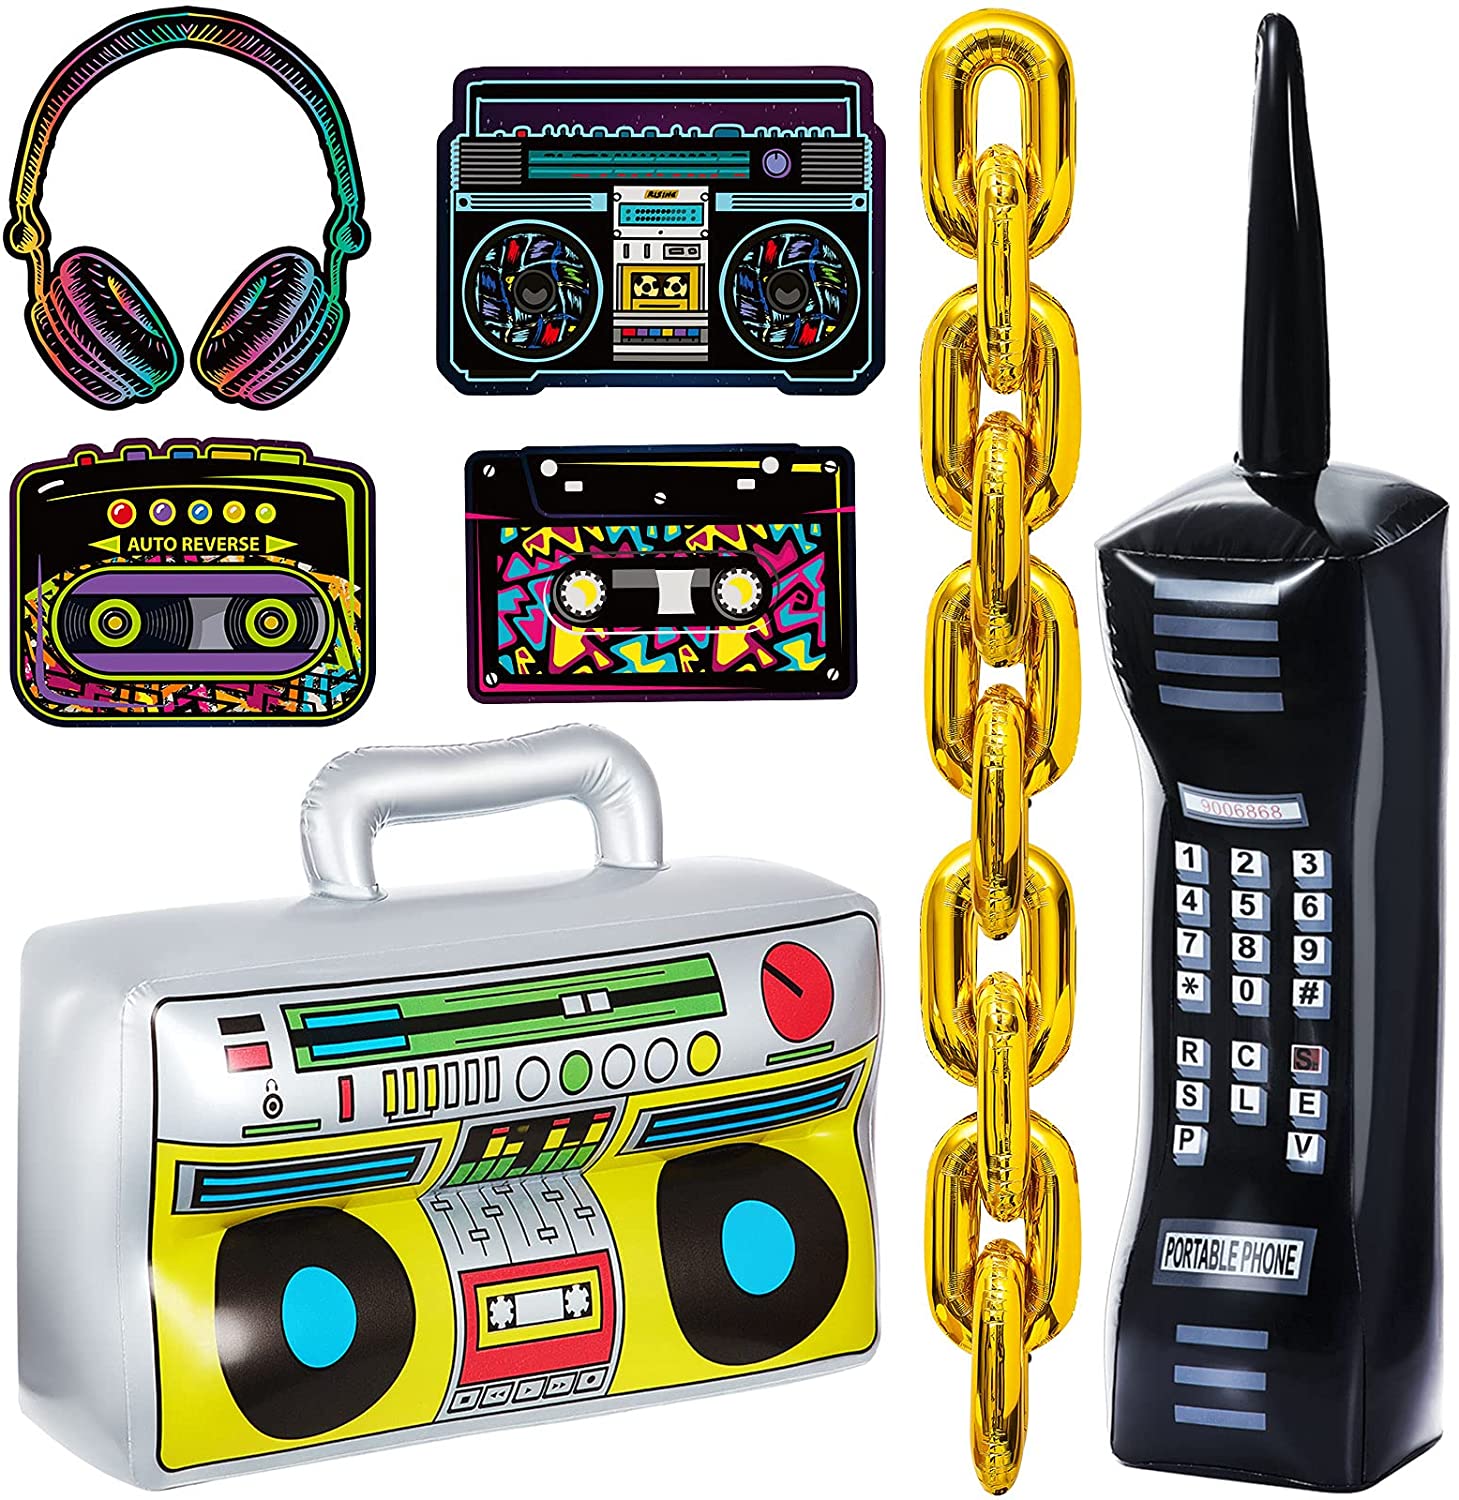 RichMoho Inflatable Radio Boom Box Inflatable Mobile Phone Pros for 80s 90s Party Decorations